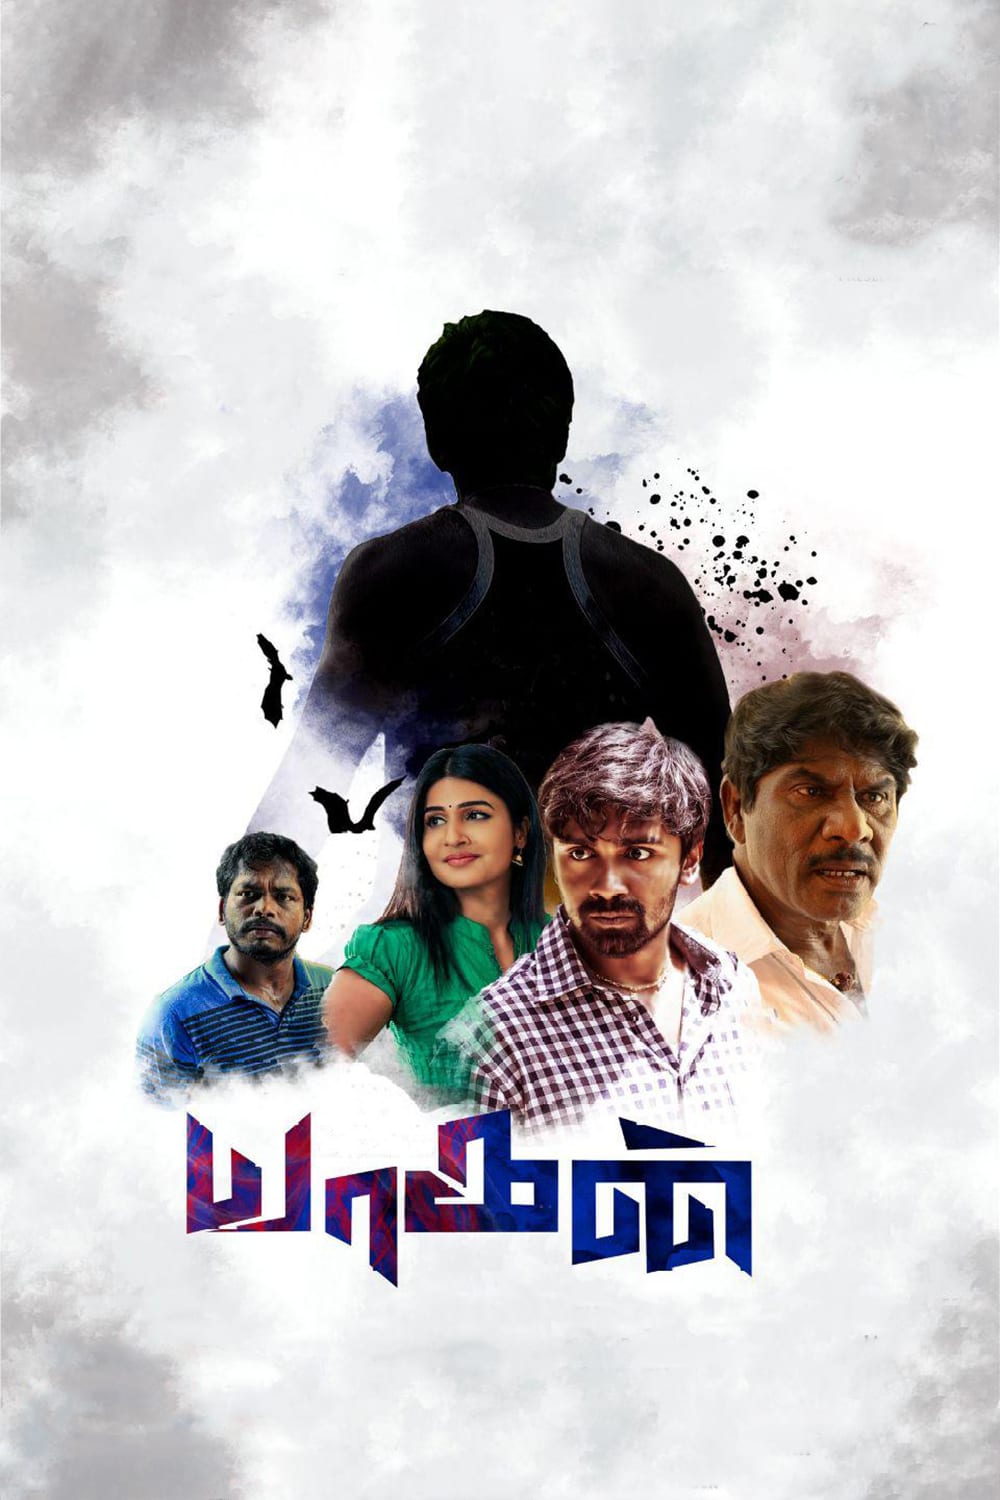 Poster for the movie "Yaagan"